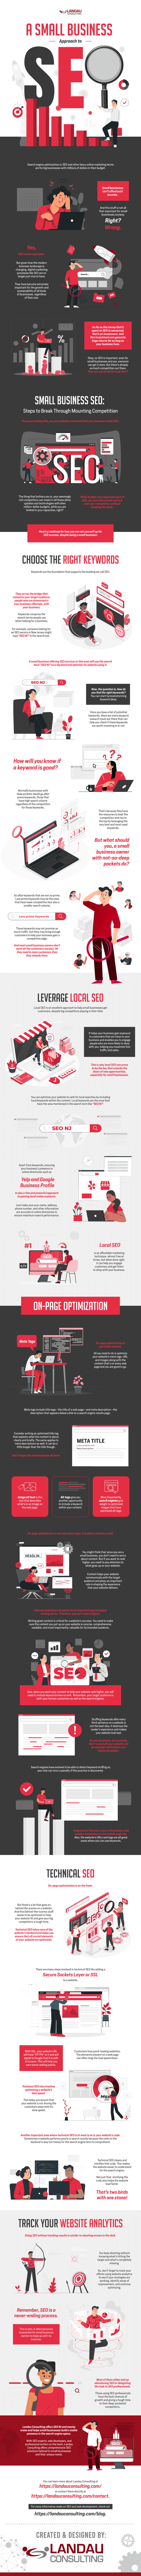 A-Small-Business-Approach-to-SEO-Infographic